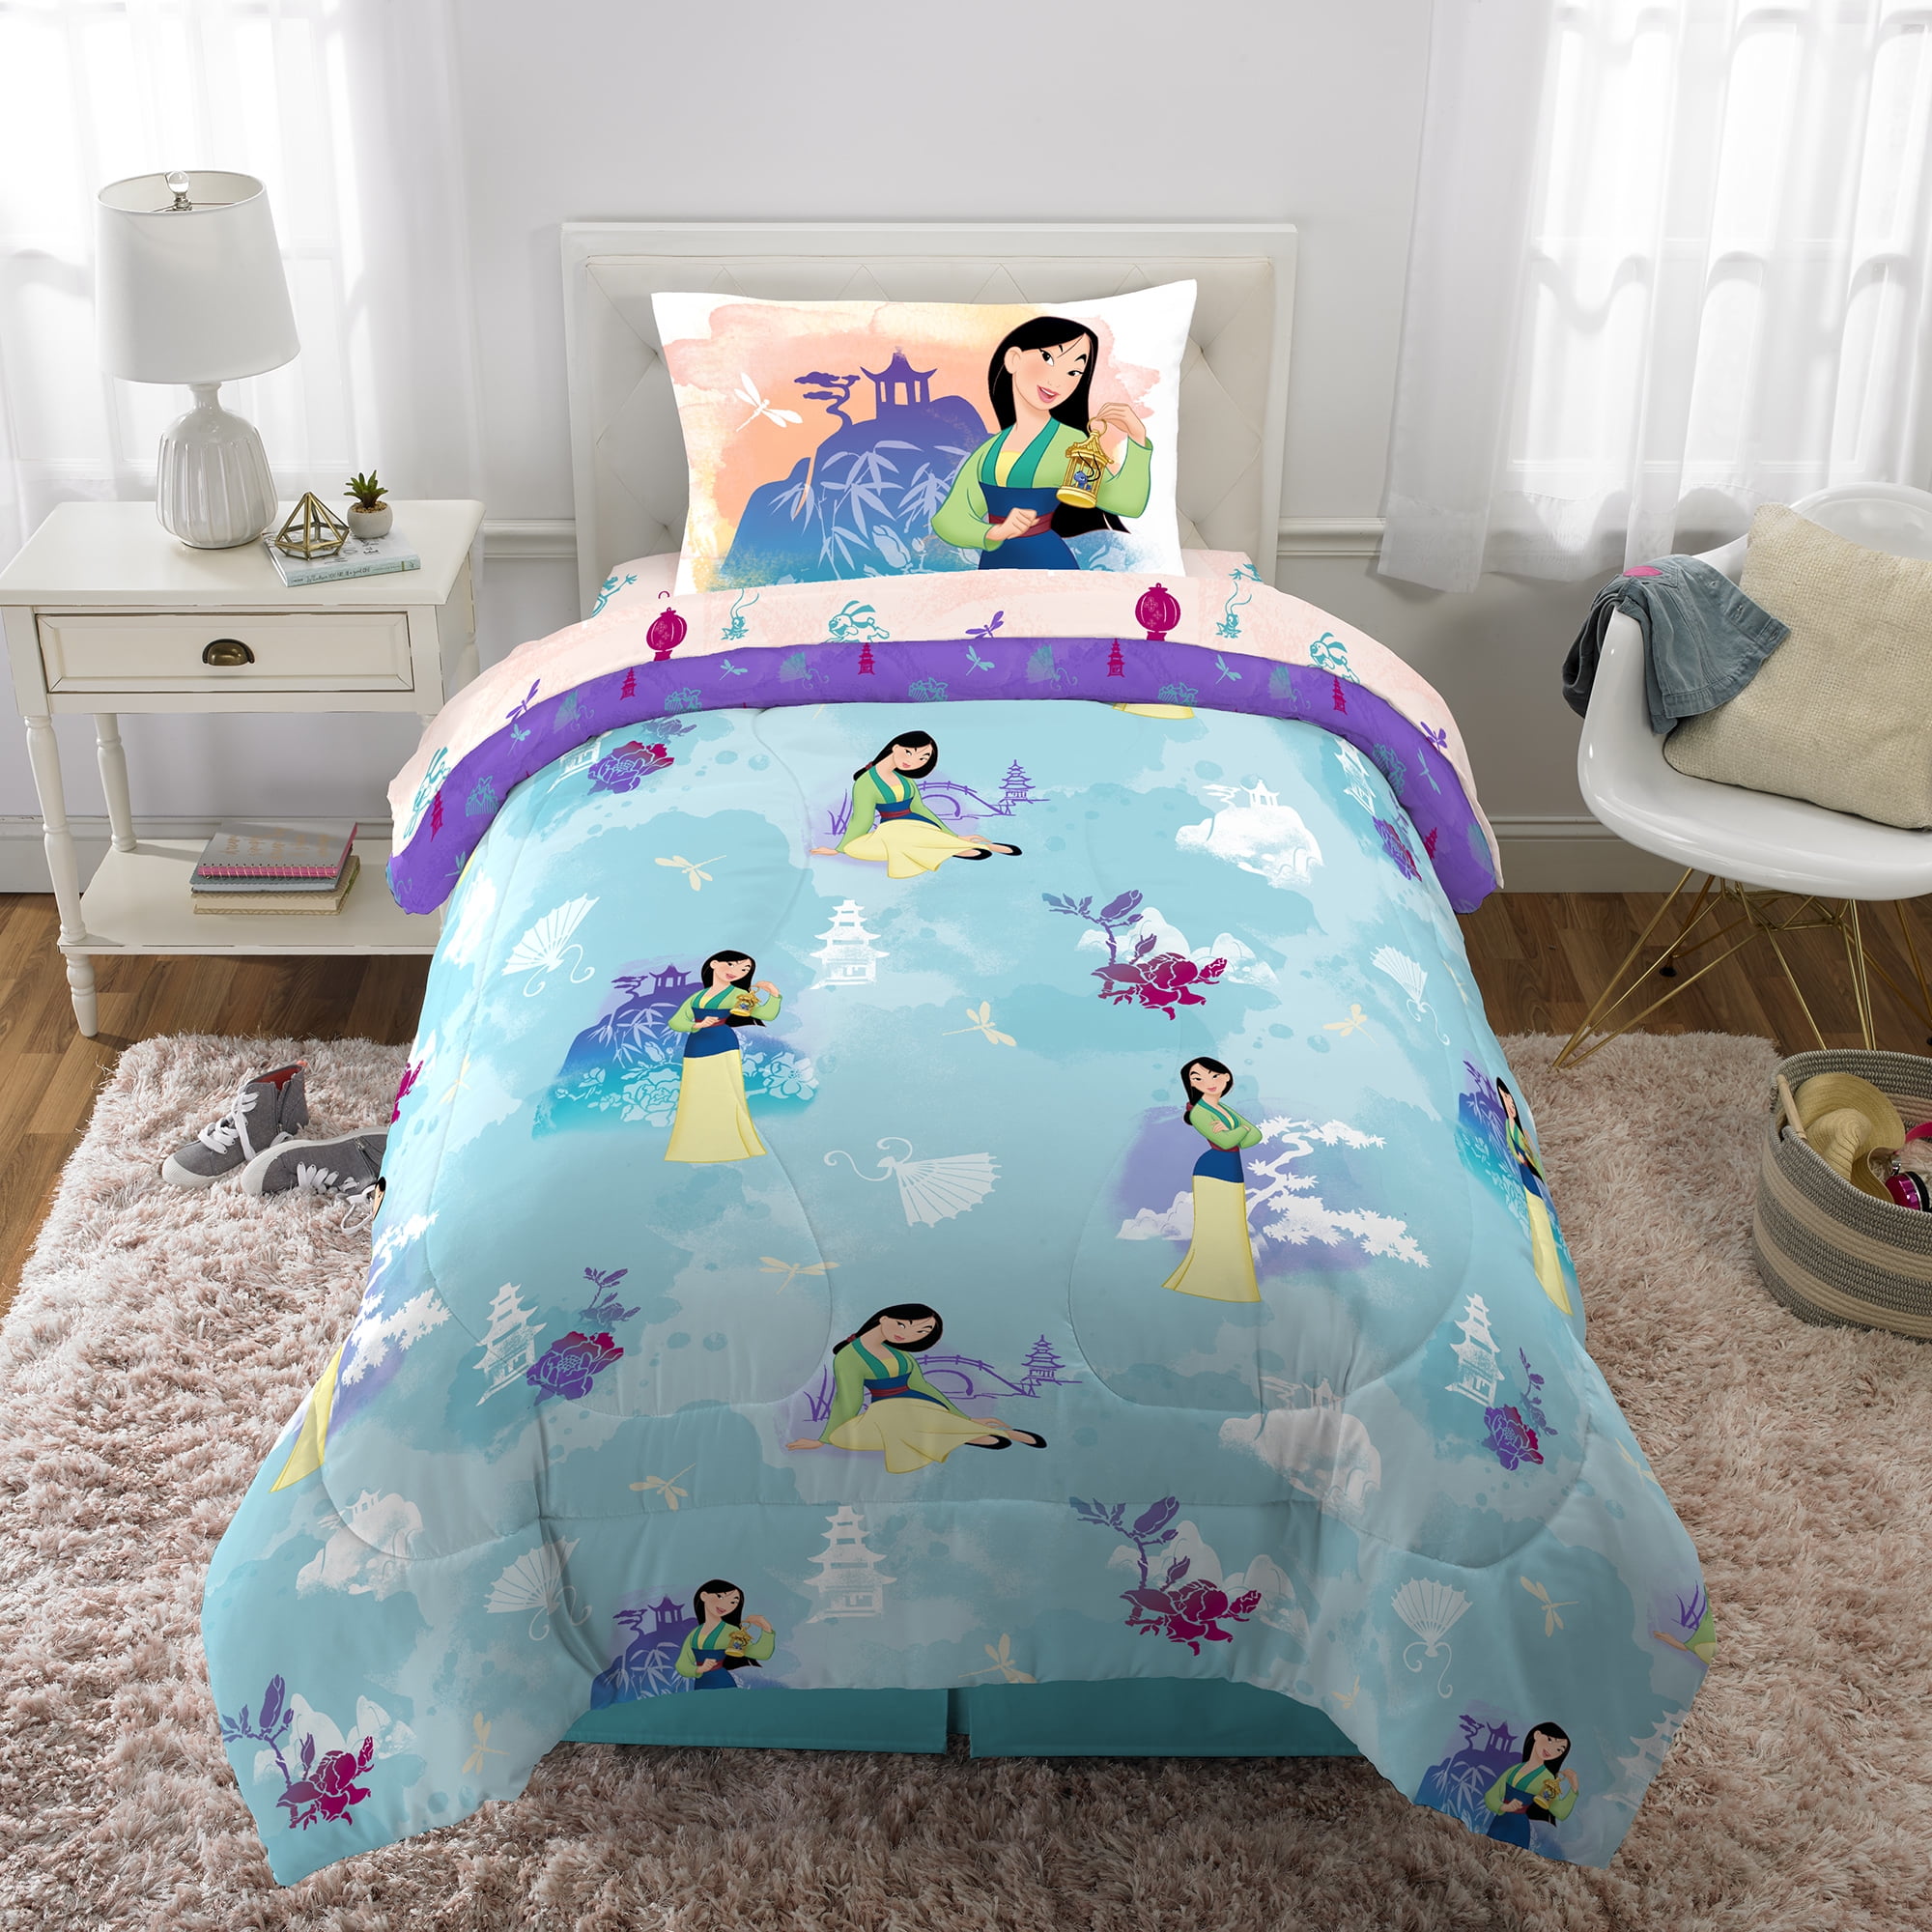 NEW TWIN/FULL DISNEY COLLECTION BED COMFORTER SET MOVIE CARTOONS KIDS FAVORITES 